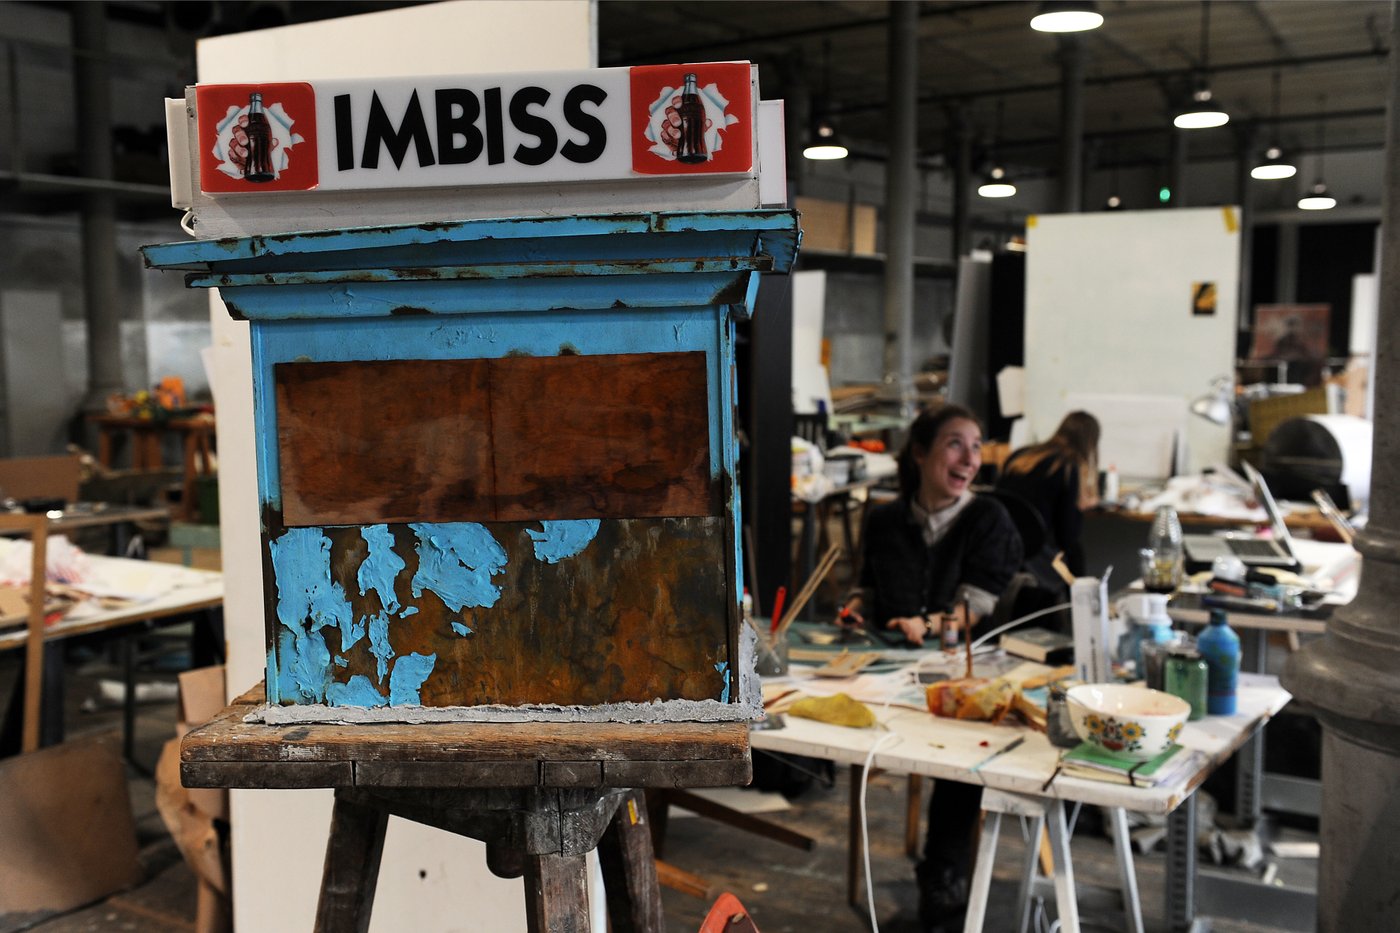 In the foreground you can see the model of a stage setup, a kiosk with peeling blue paint and the inscription "Imbiss" above it. In the background you can see the studio situation with students at tables filled with working material.